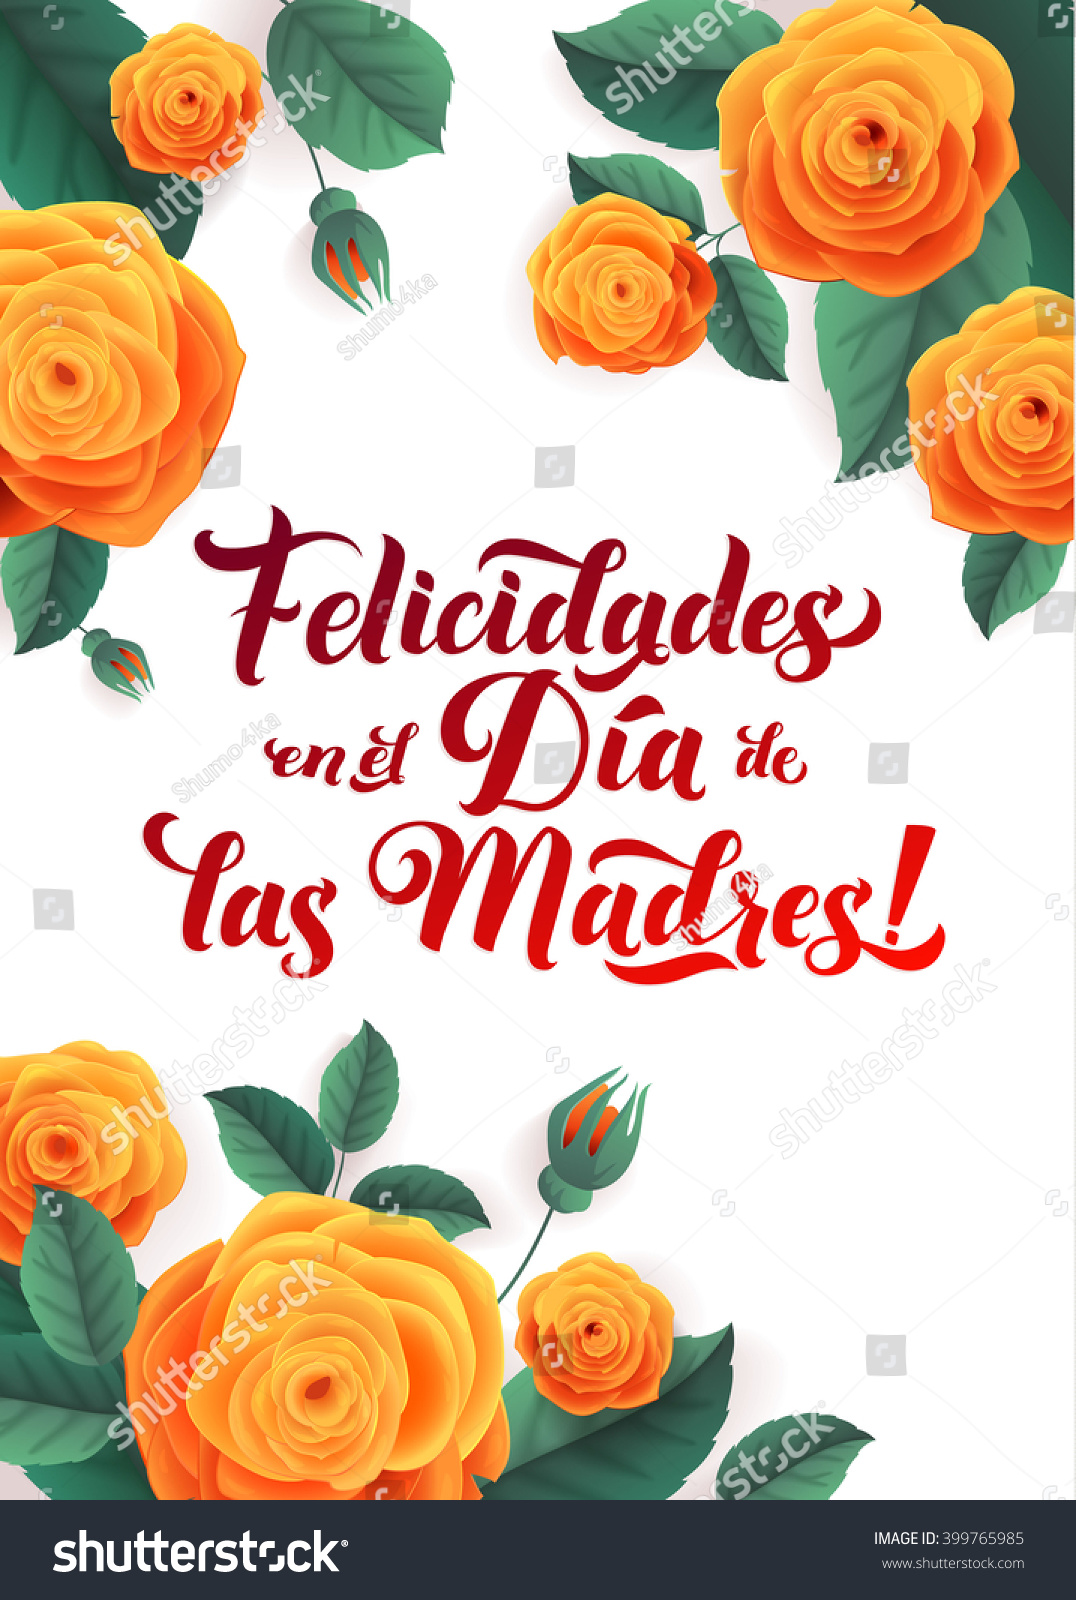 Happy Mothers Day Spanish Greeting Card Stock Vector 399765985